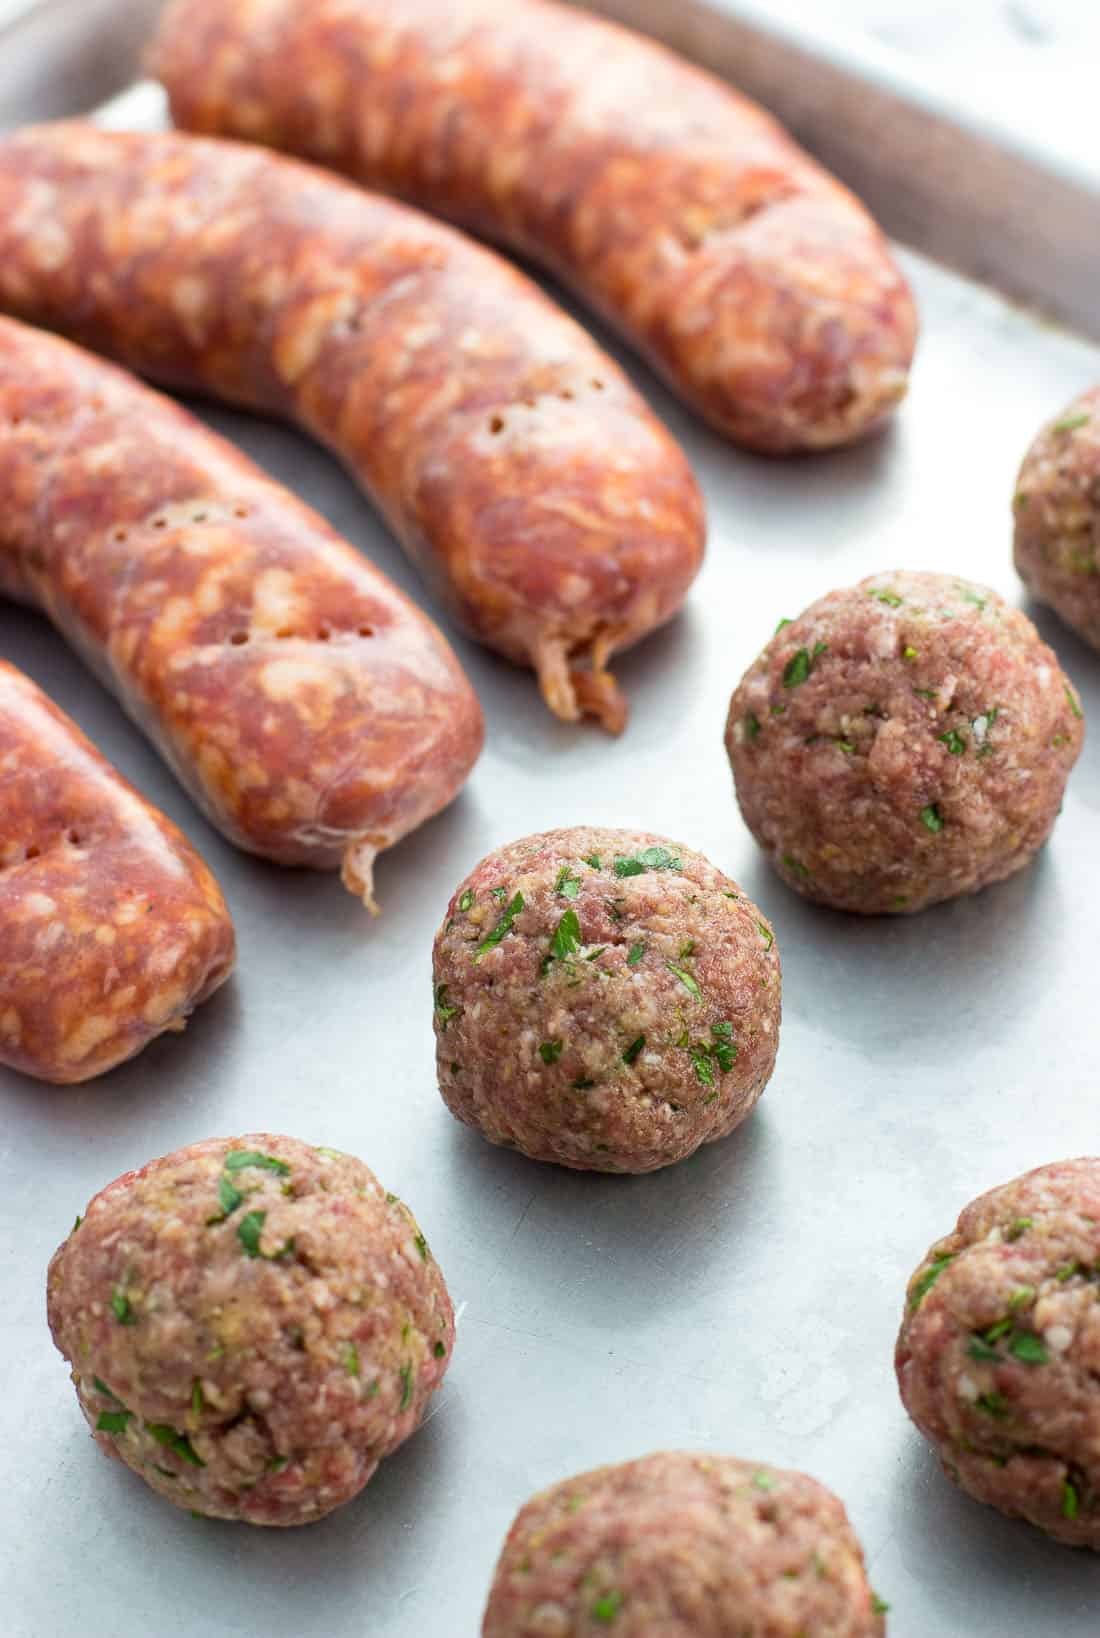 Meatballs and sausage links on a large metal baking sheet before baking in the oven